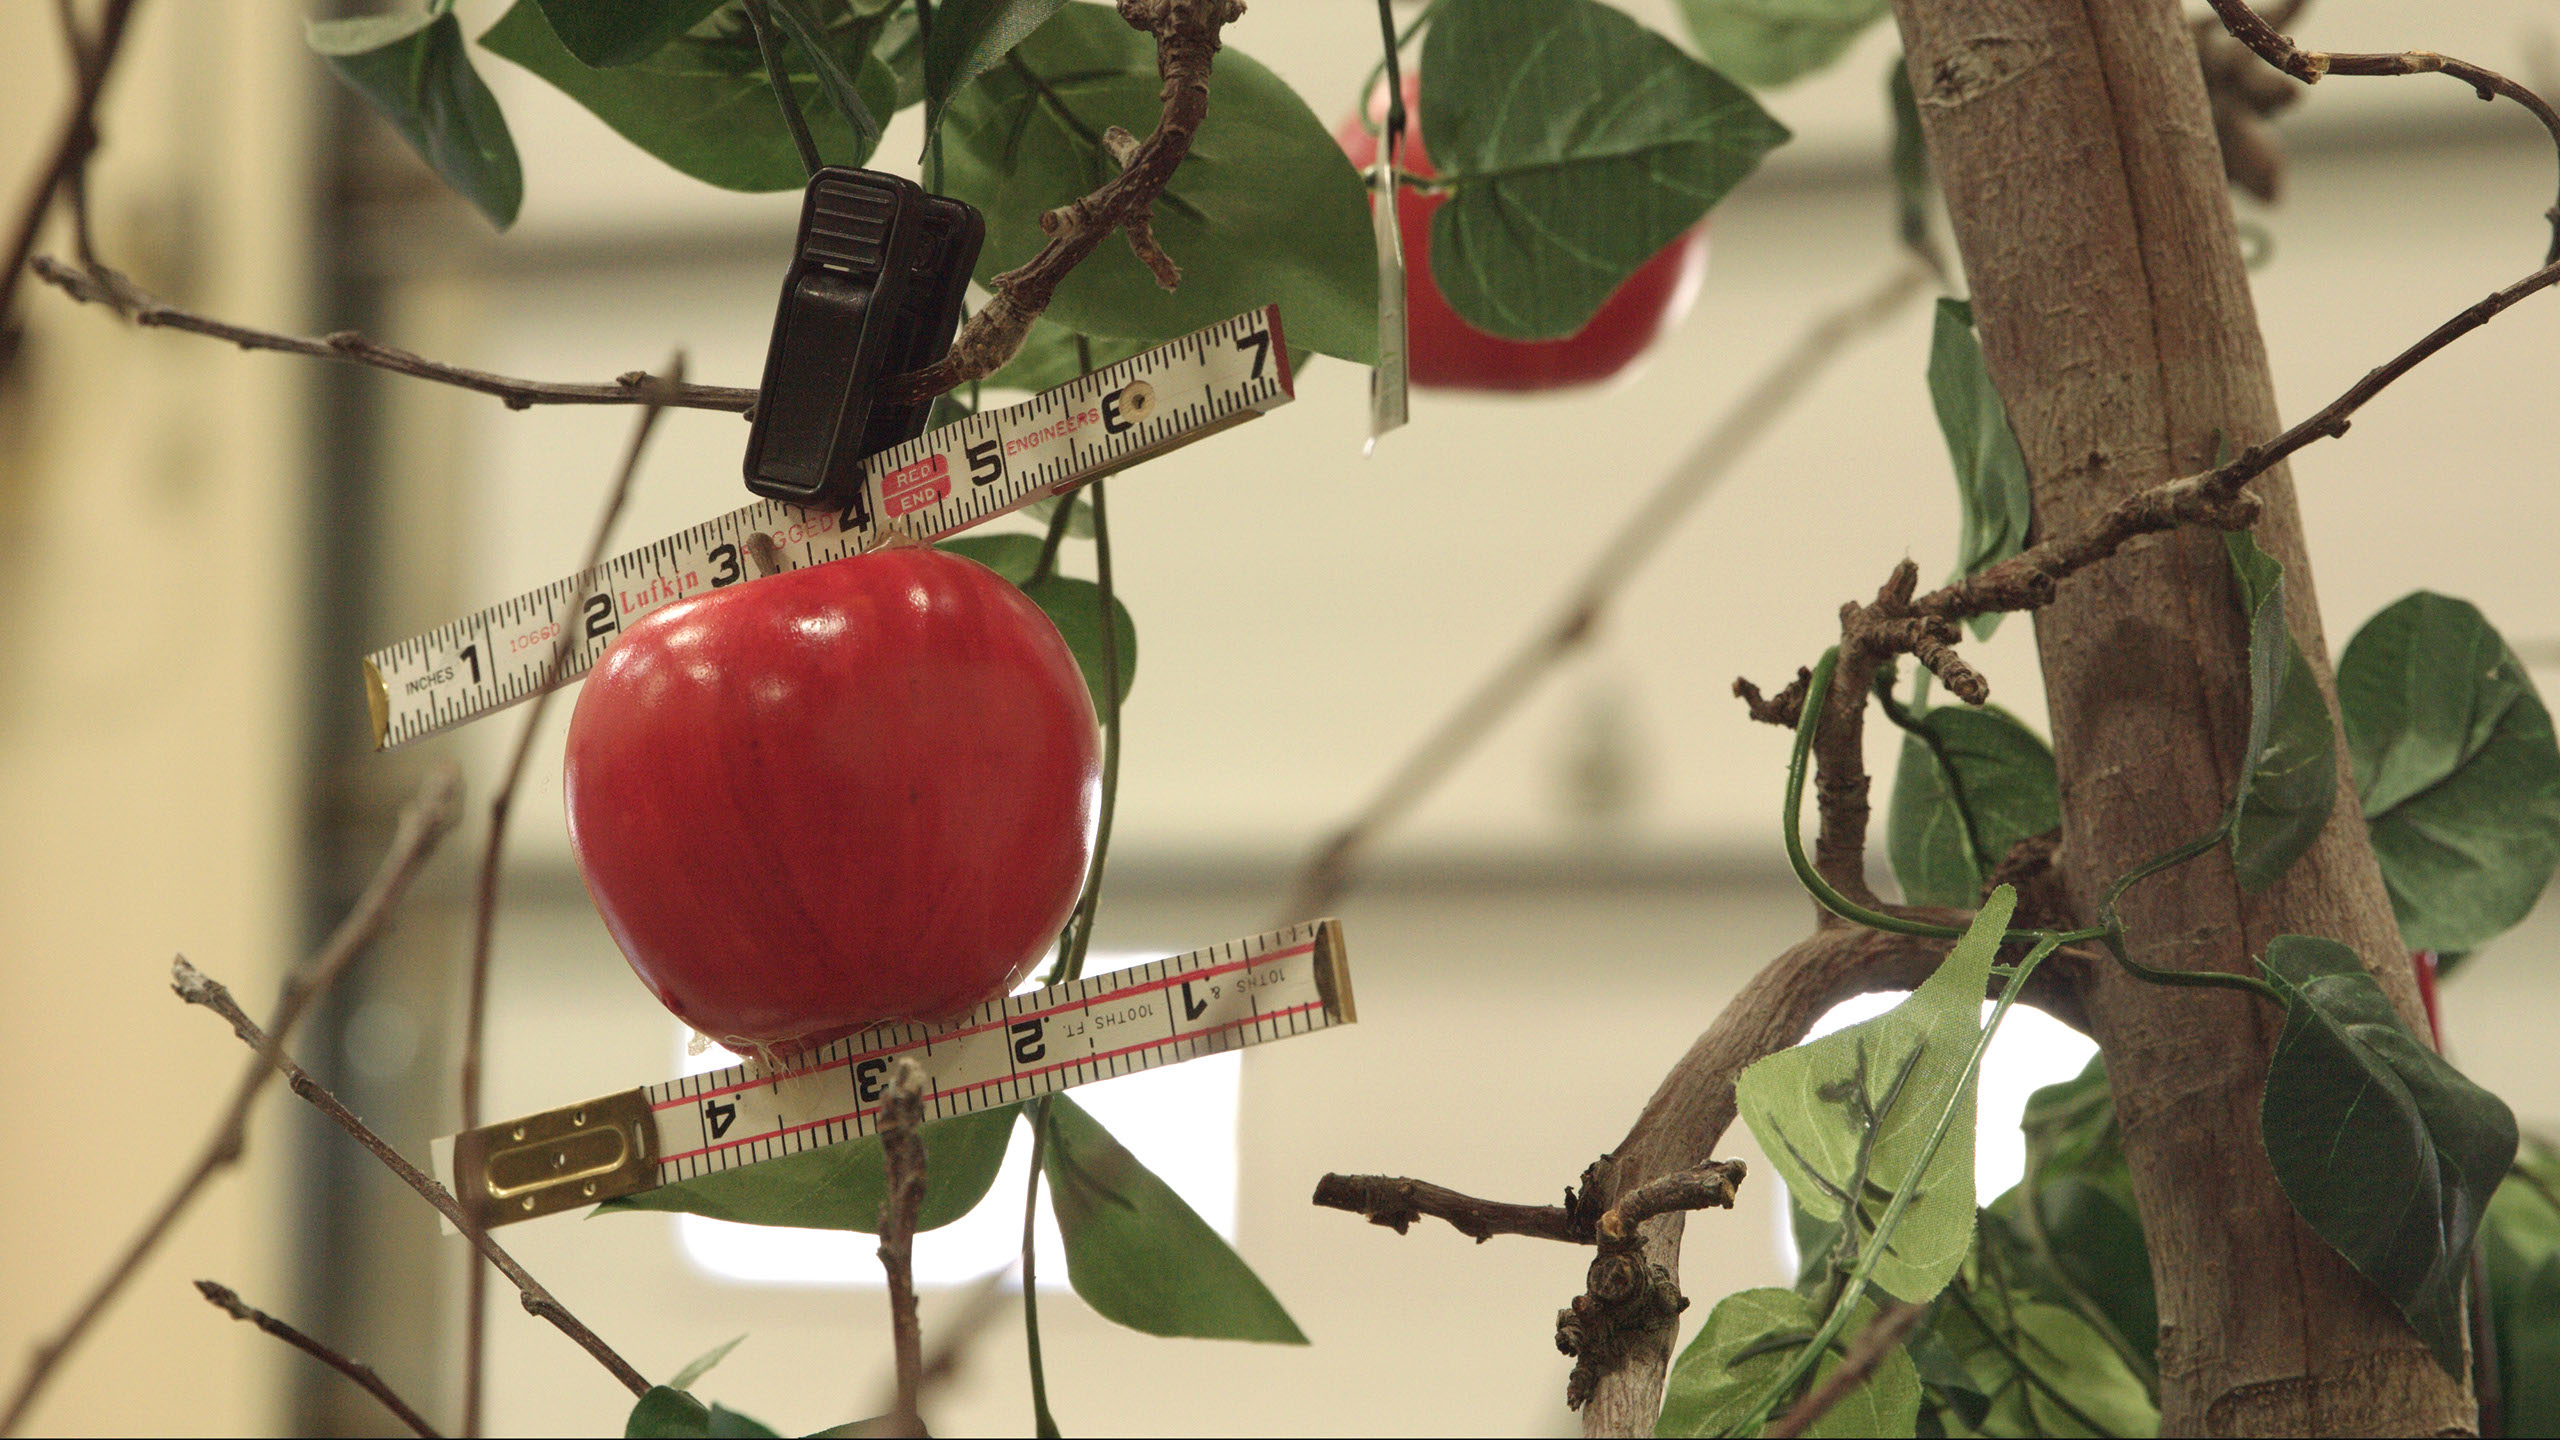 An apple being measured.